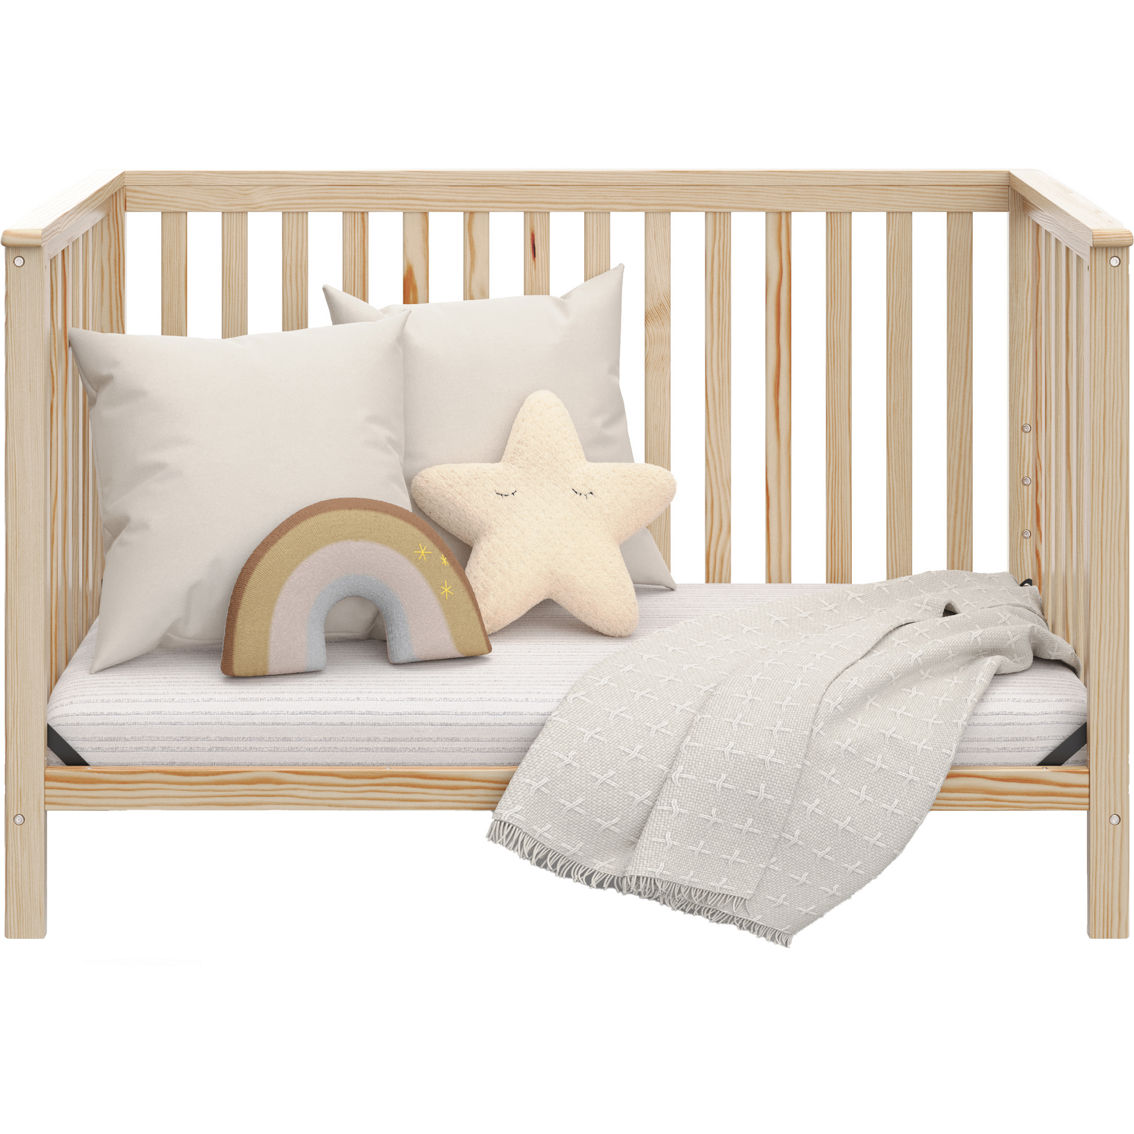 Storkcraft Hillcrest 4-in-1 Convertible Crib - Natural - Image 2 of 7